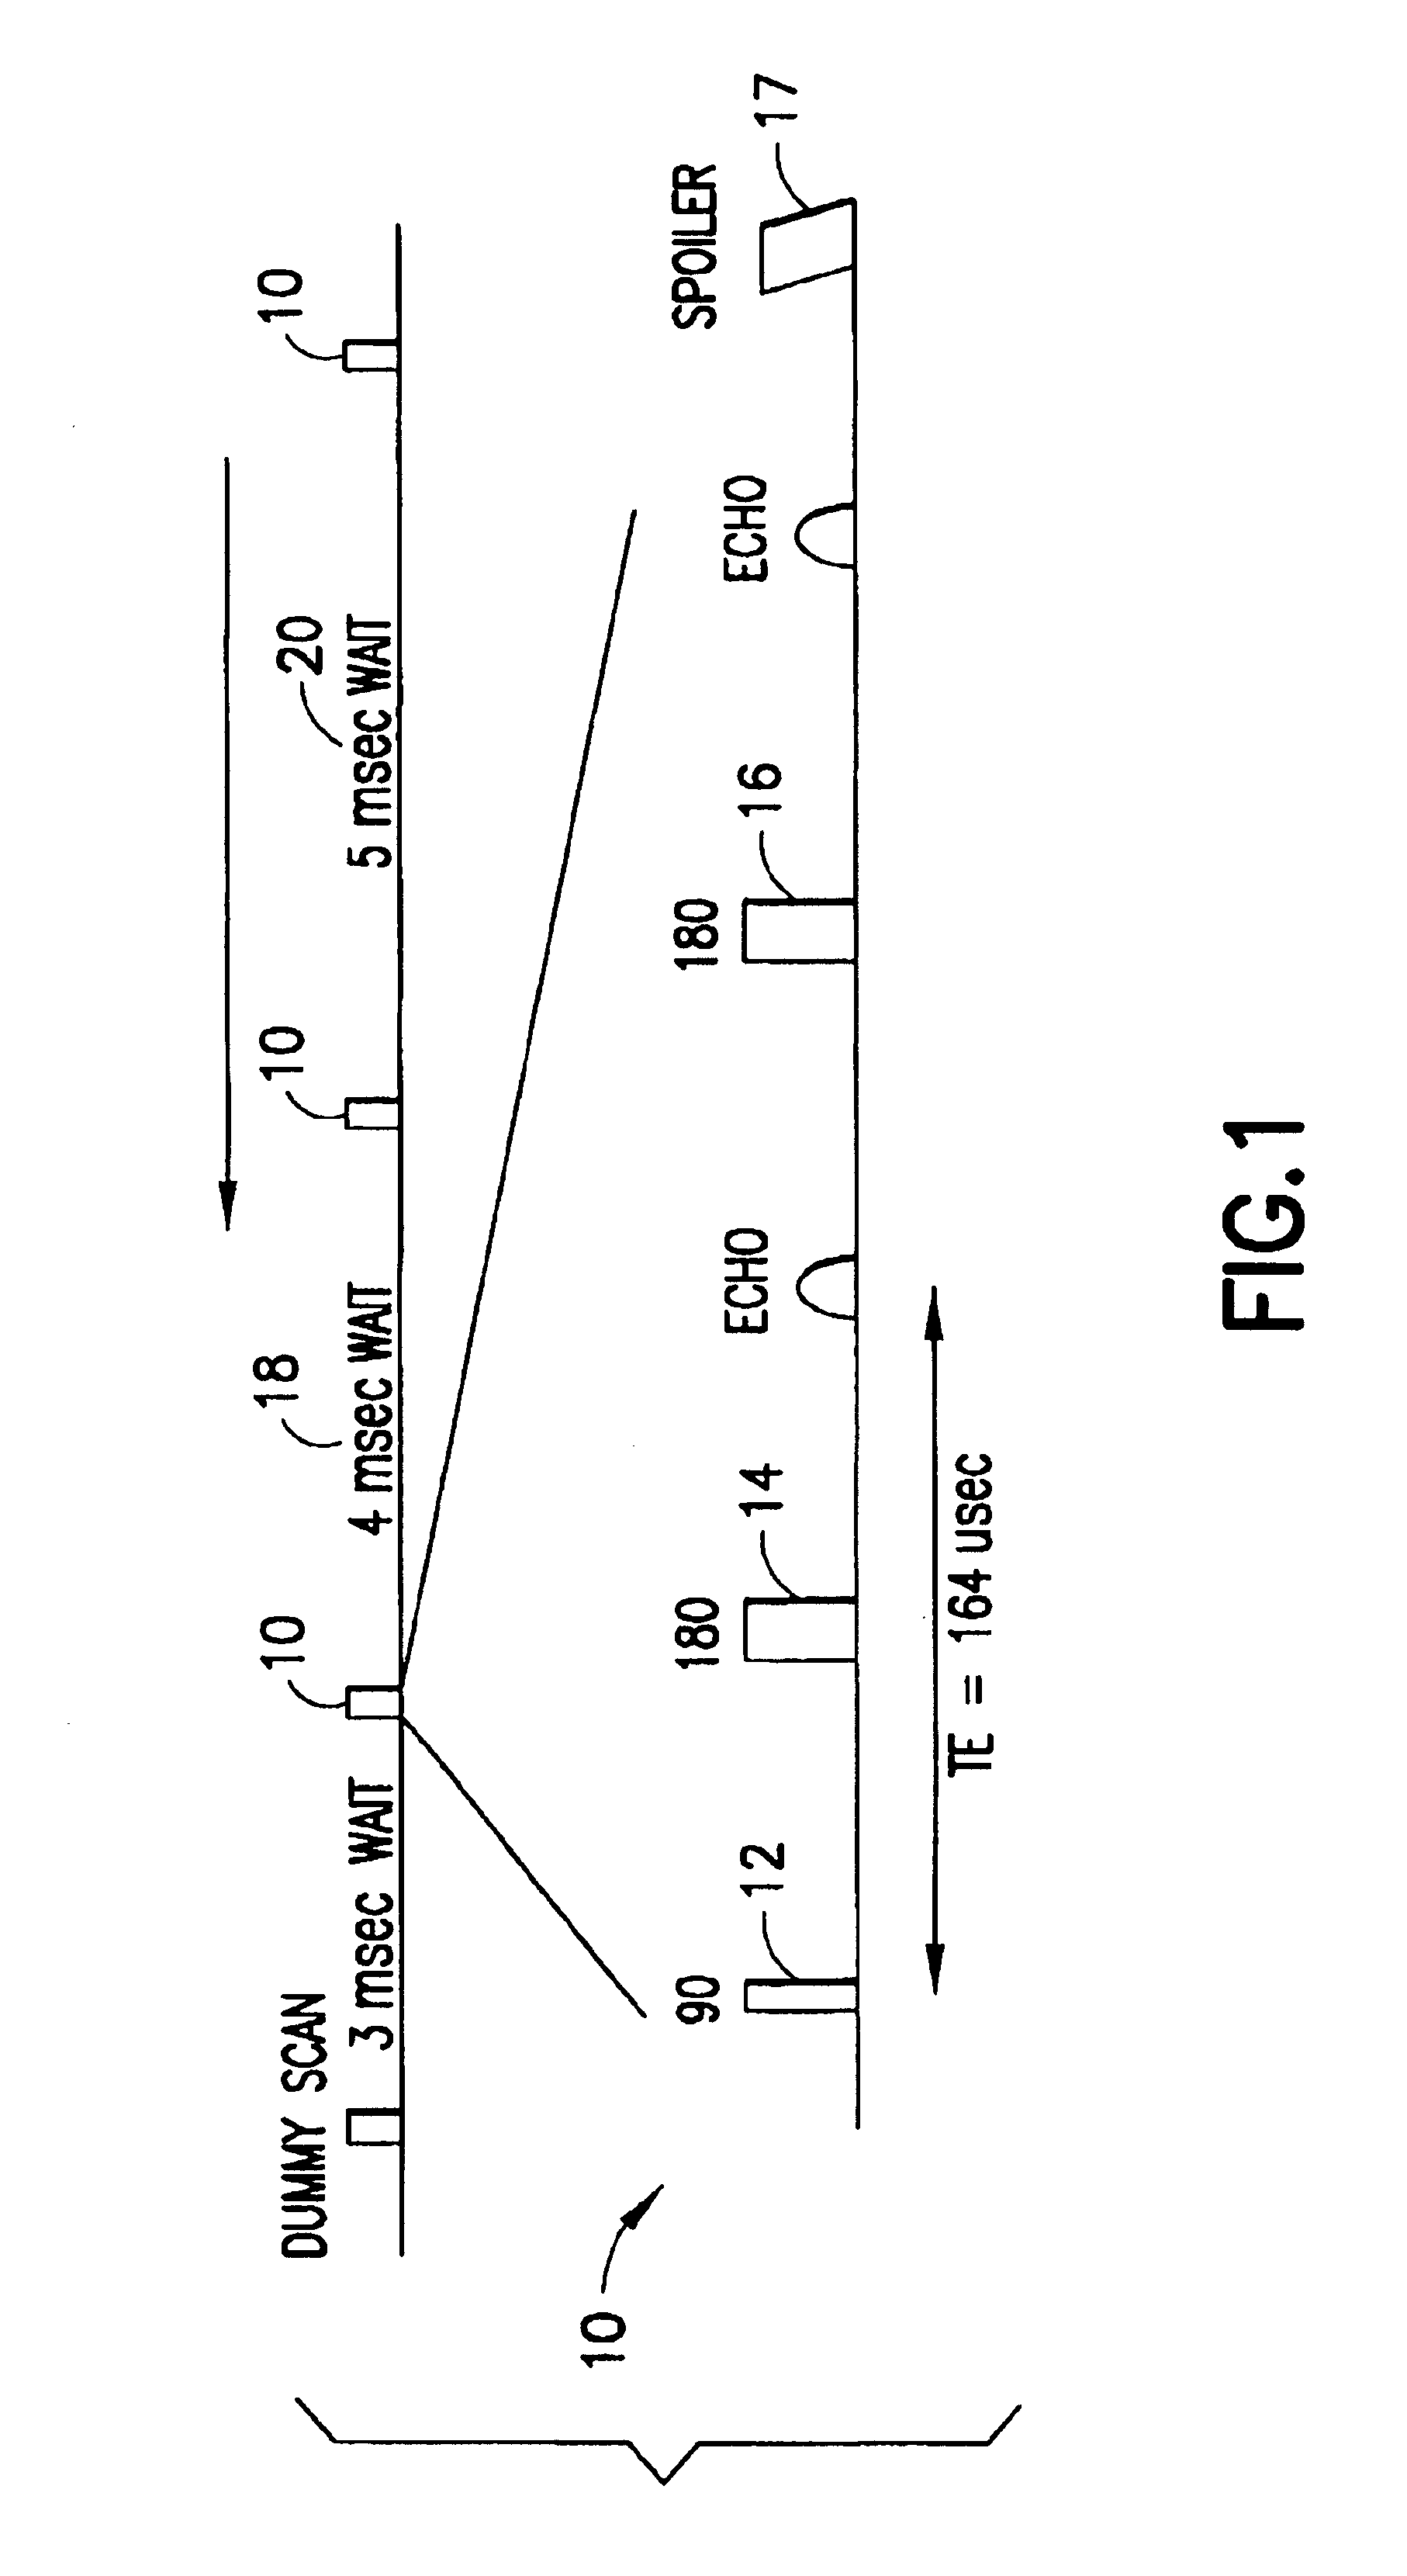 Nuclear magnetic resonance apparatus and methods for analyzing fluids extracted from earth formation